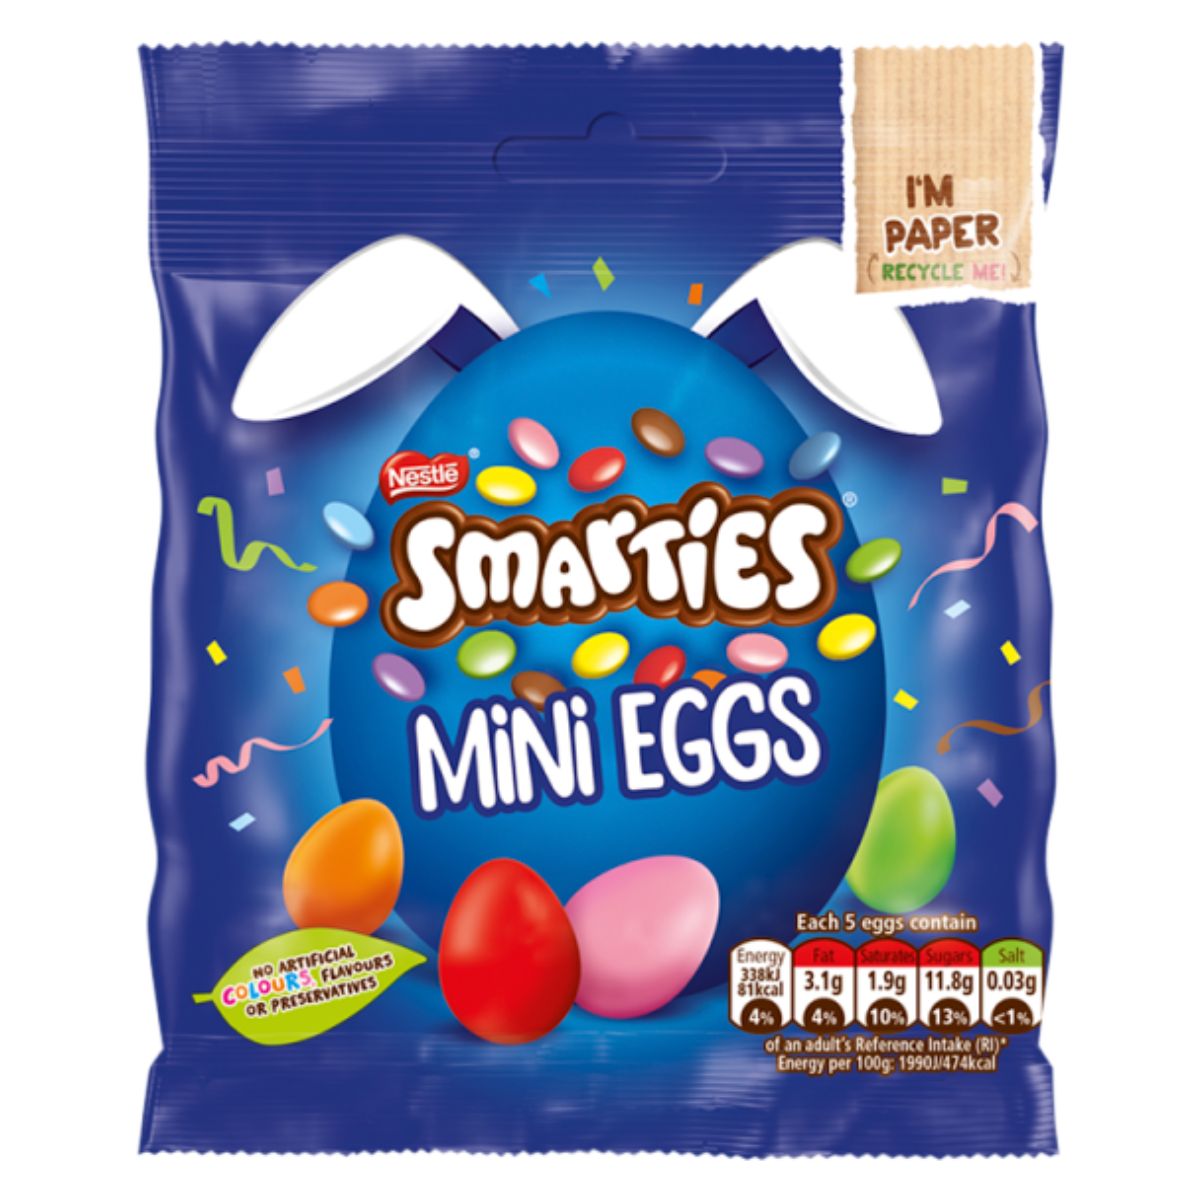 A package of Nestle Smarties Milk Chocolate Mini Eggs Sharing Bag with "i'm paper recycle me" label.